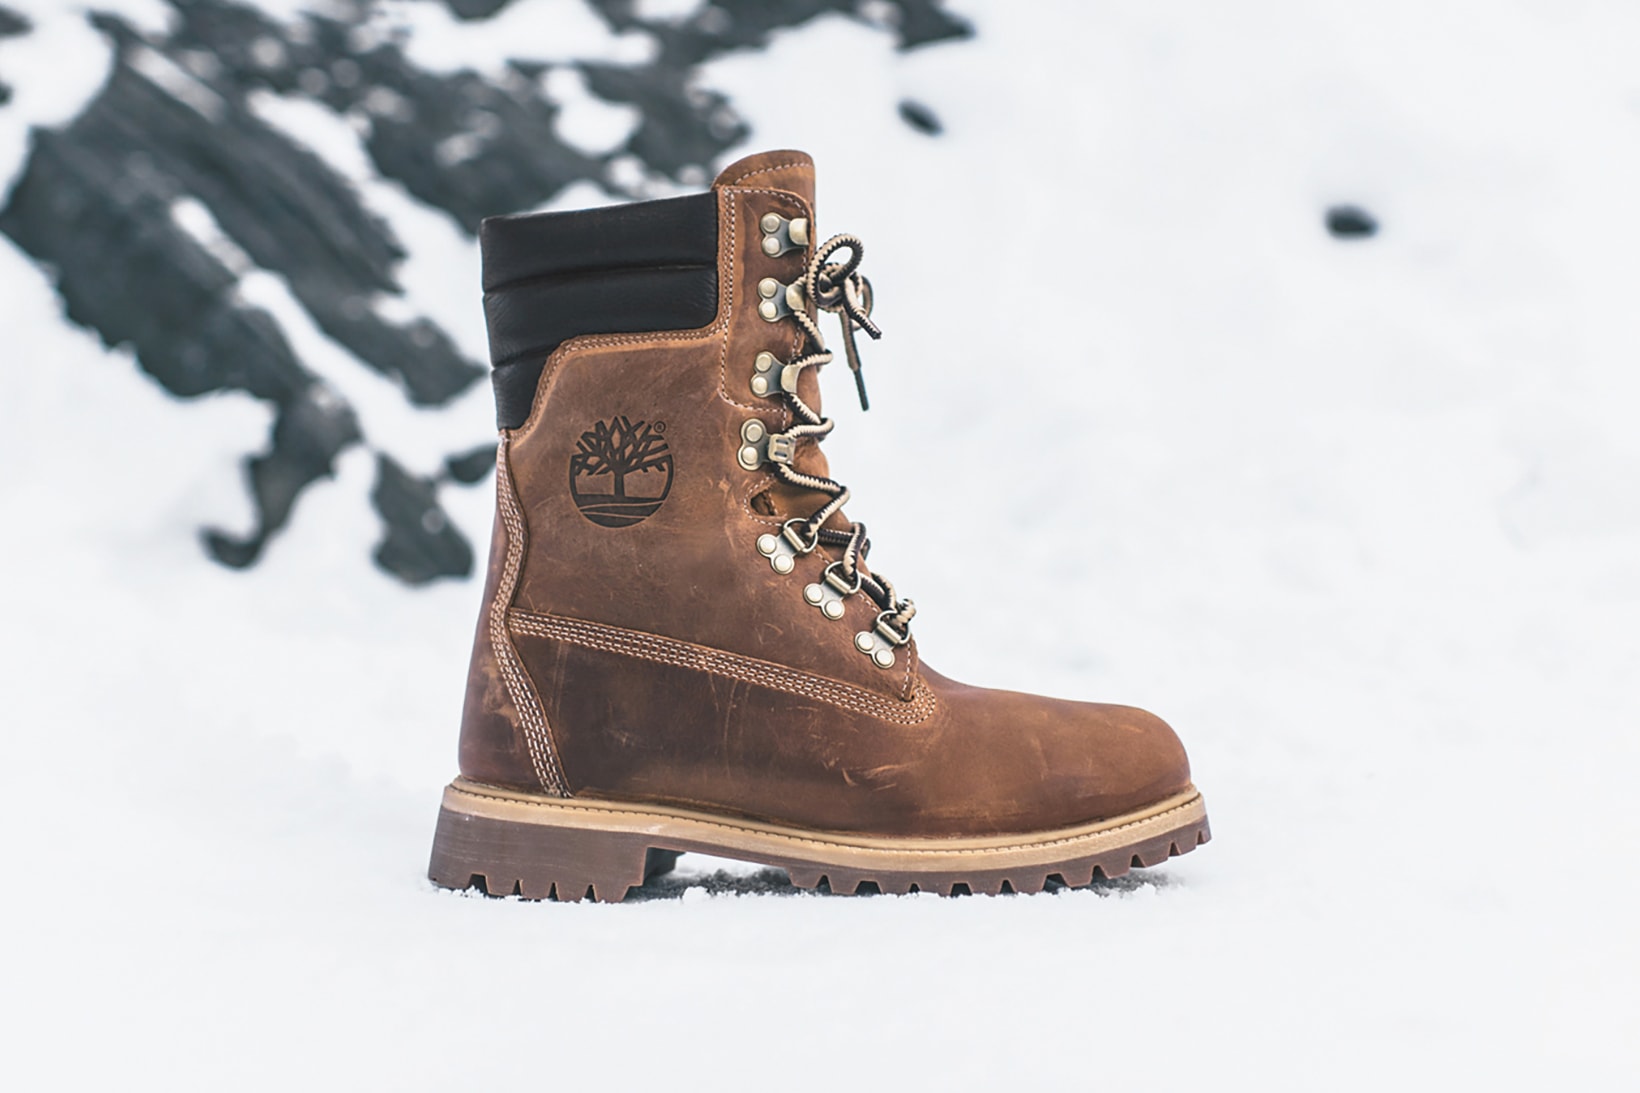 Ronnie Fieg Timberland KITH Chapter 3 distressed rust leather black navy nylon cream shearling release date footwear January 20